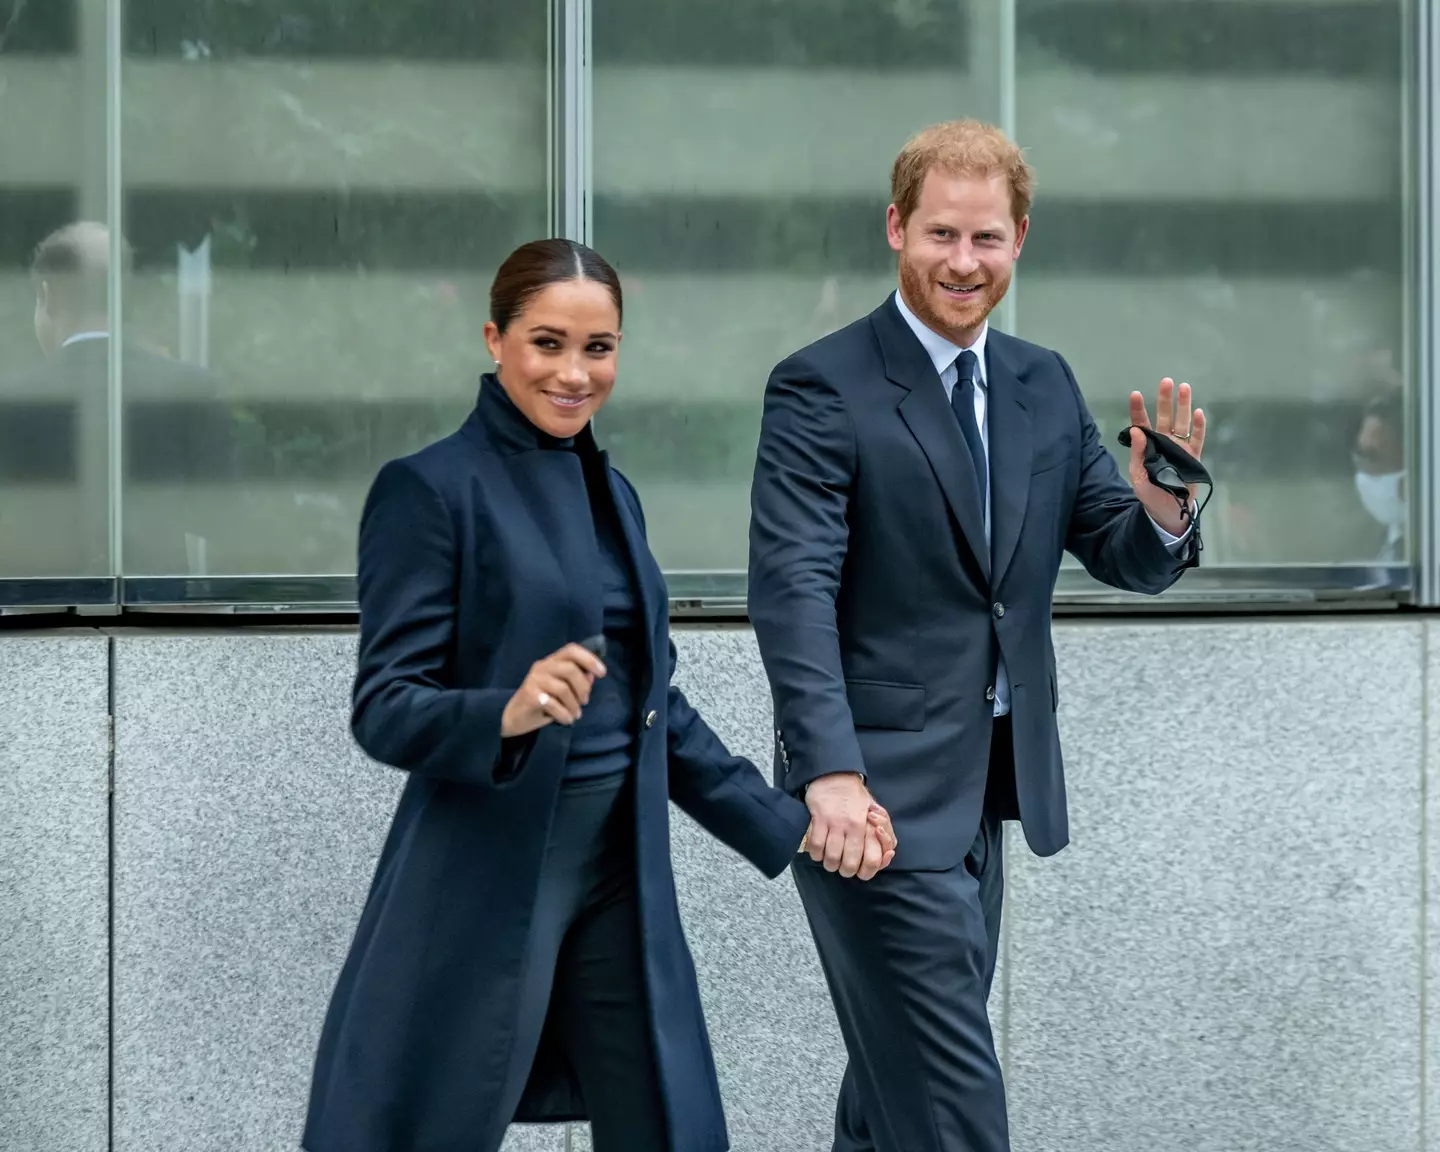 At the start of 2020, Harry and Meghan announced they would be stepping down from their roles (